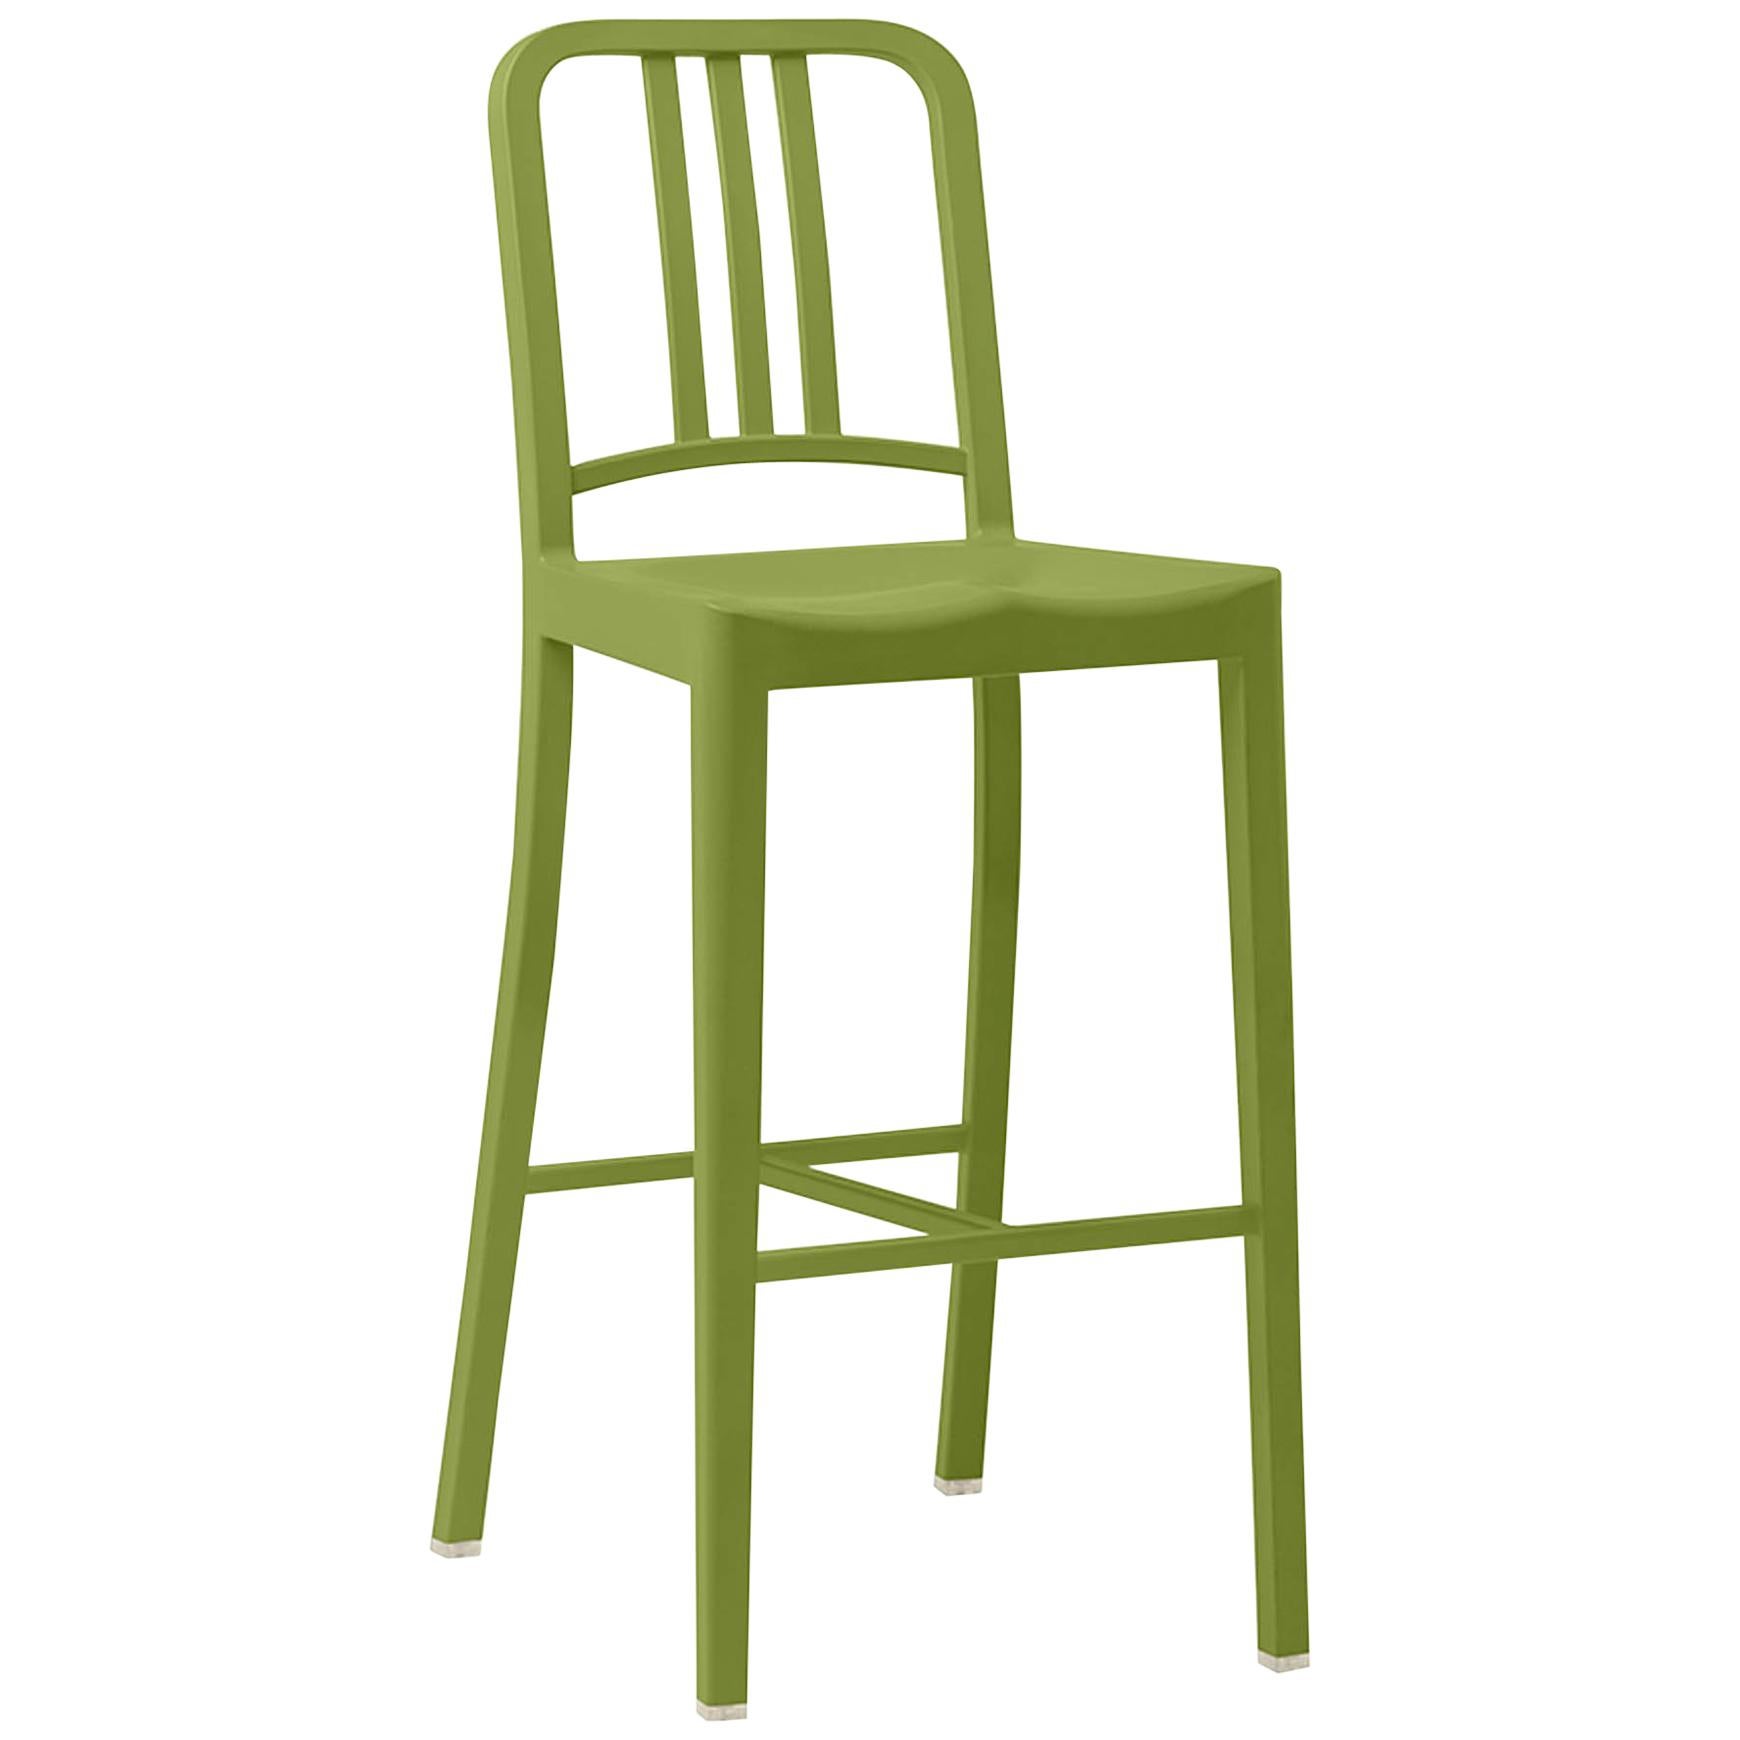 Emeco 111 Navy Barstool in Grass by Coca-Cola